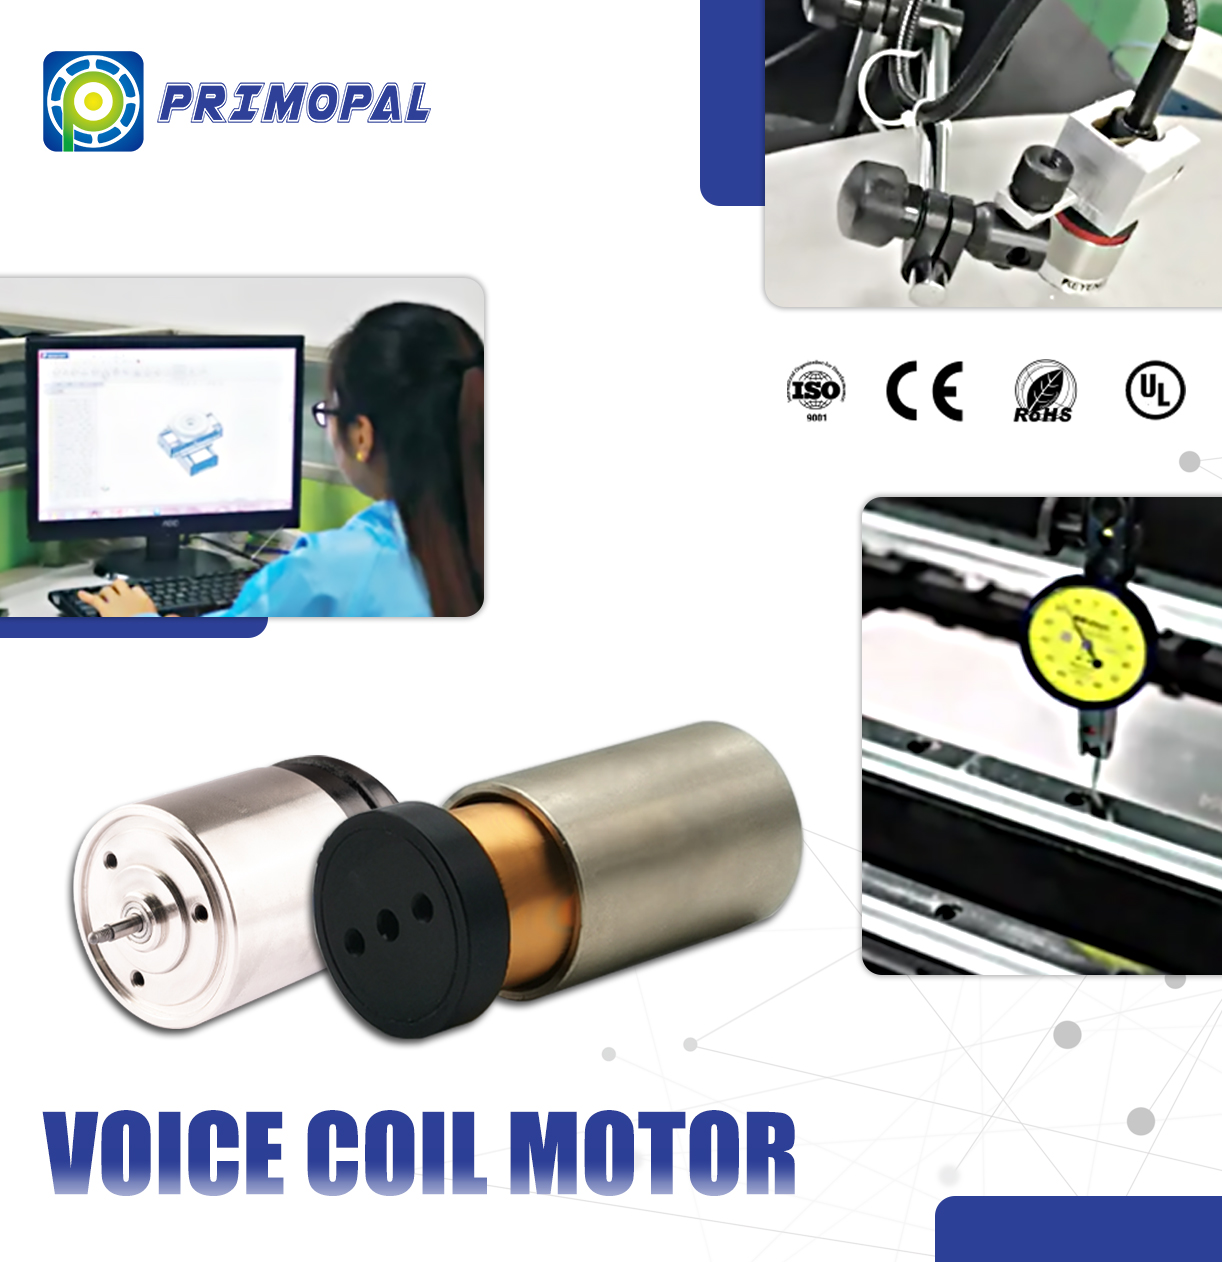 PrimoPal’s new product-voice coil motor